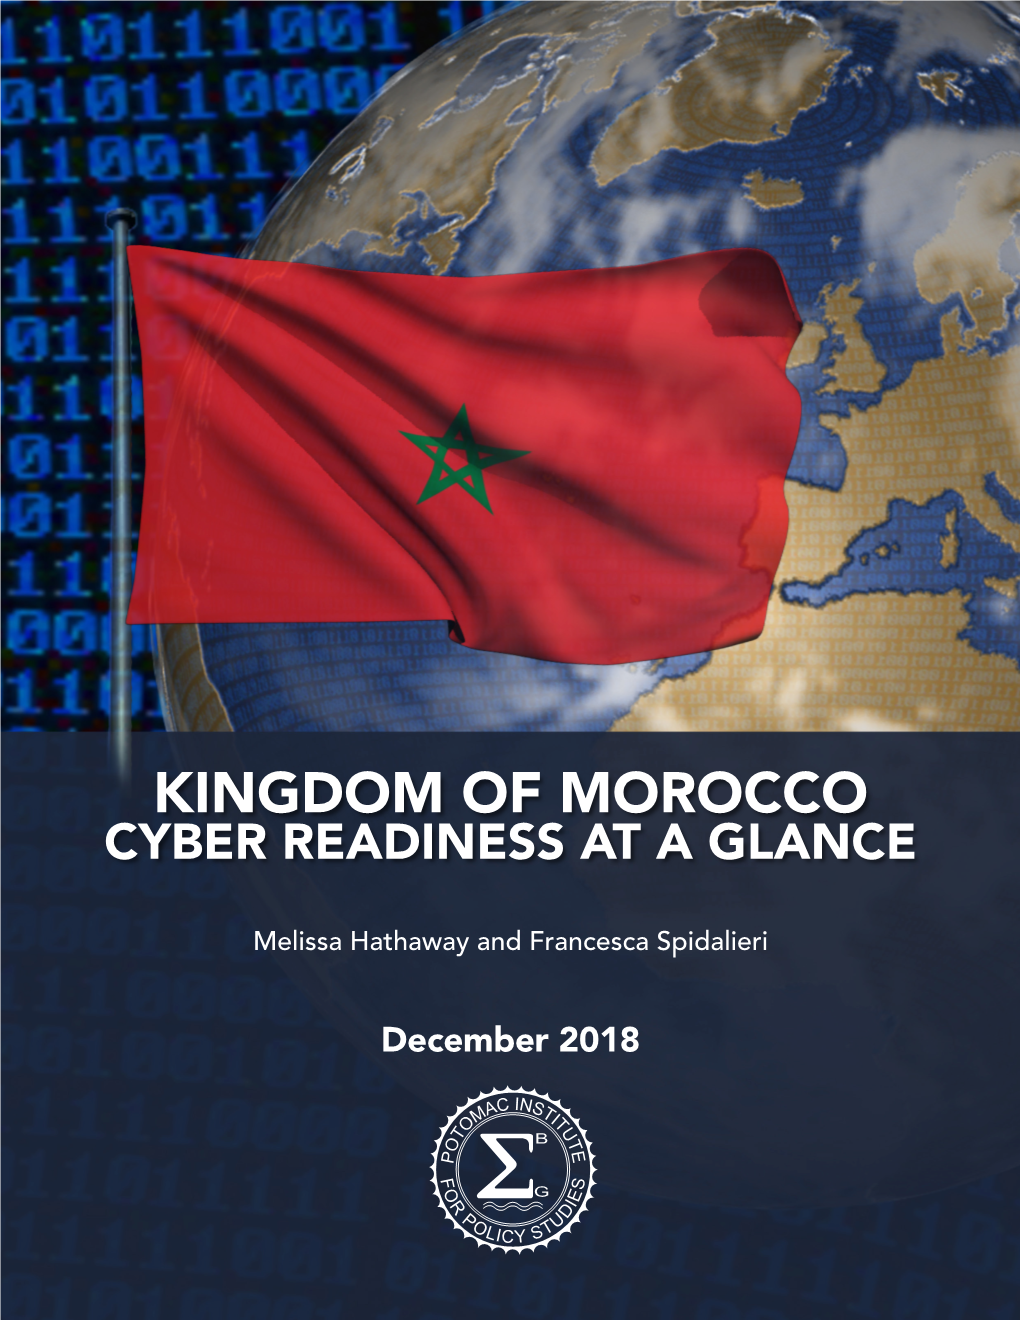 Kingdom of Morocco Cyber Readiness at a Glance